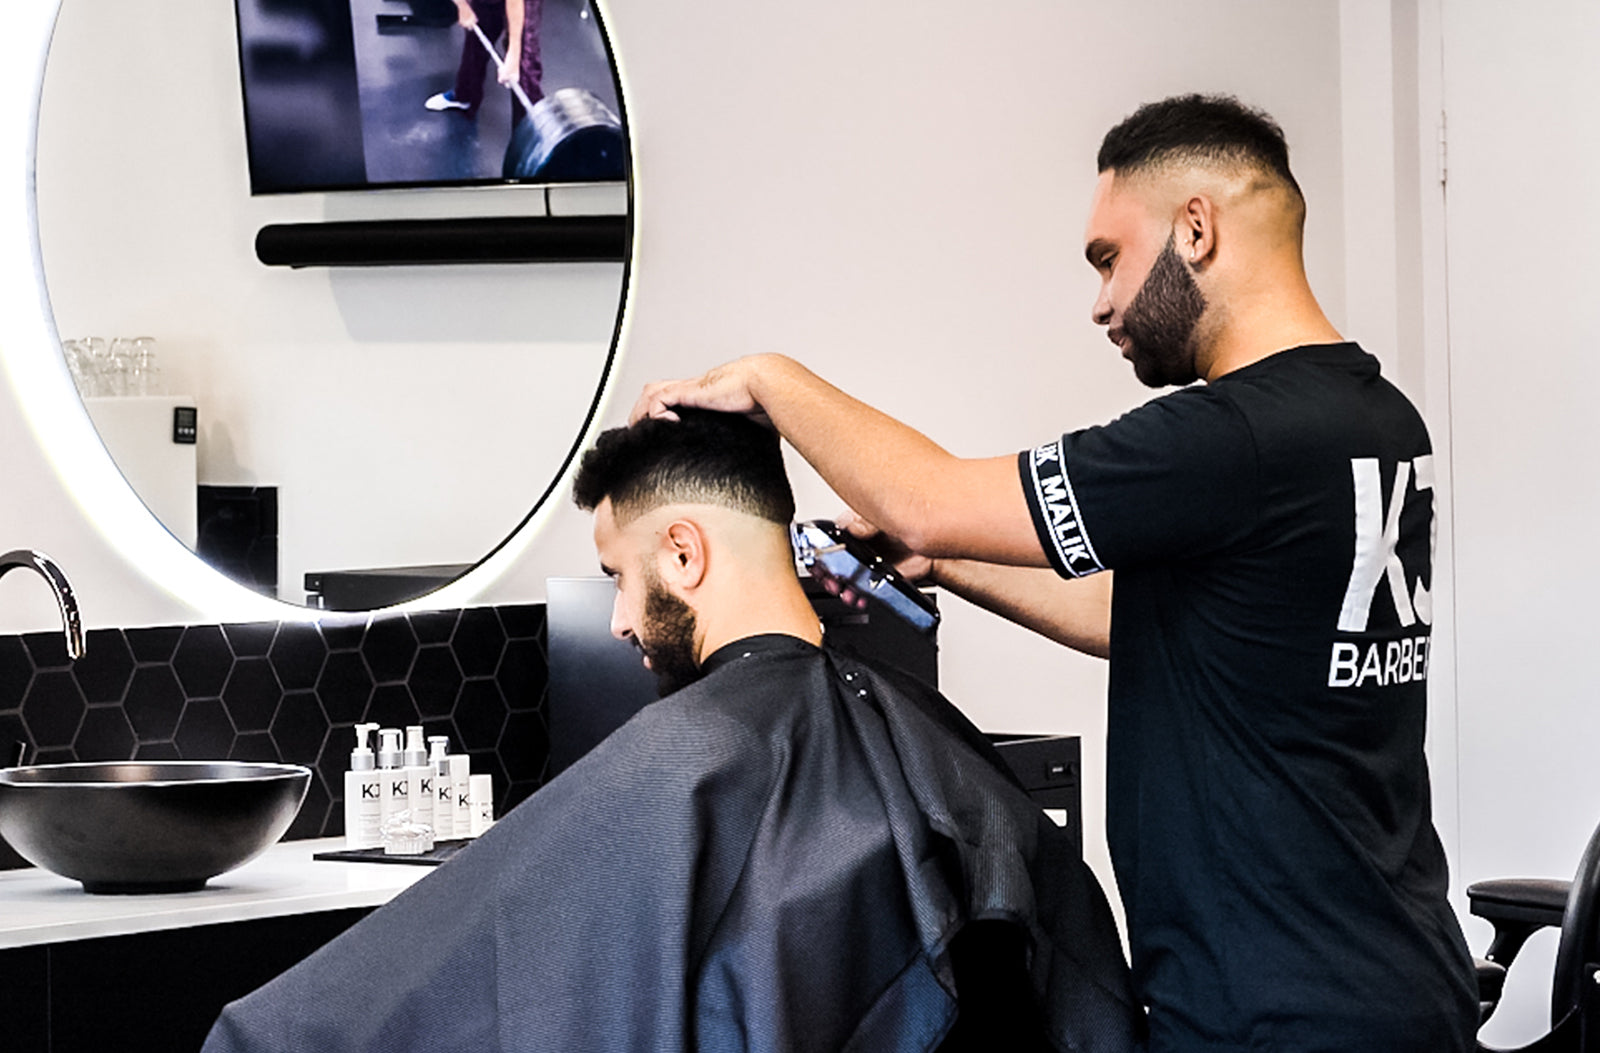 KJ Barbers provides whatever haircut you want, whether it be a skin fade, undercut or anything else